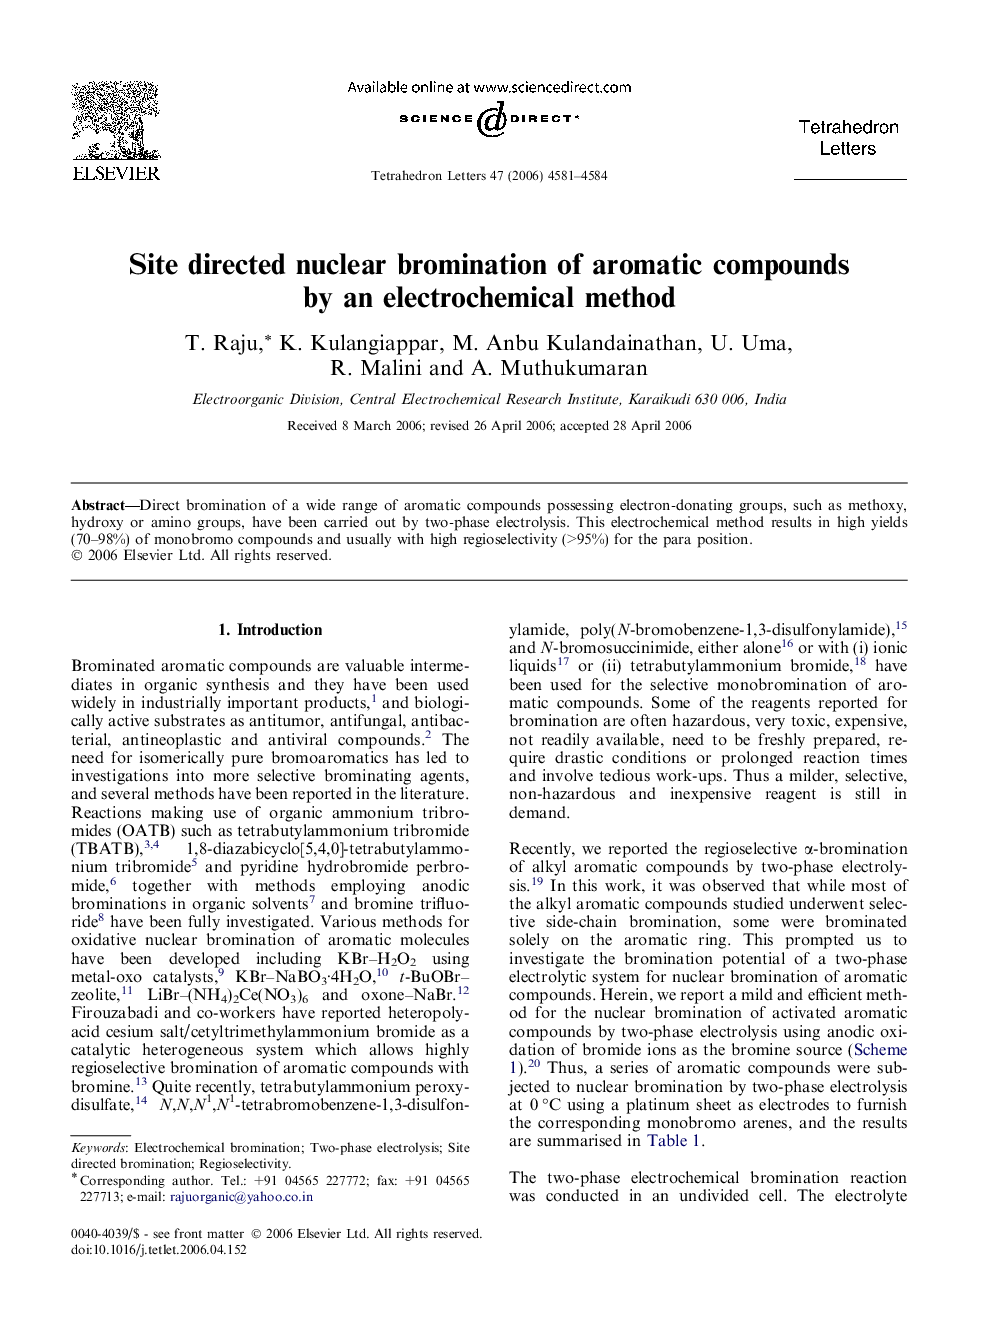 Site directed nuclear bromination of aromatic compounds by an electrochemical method